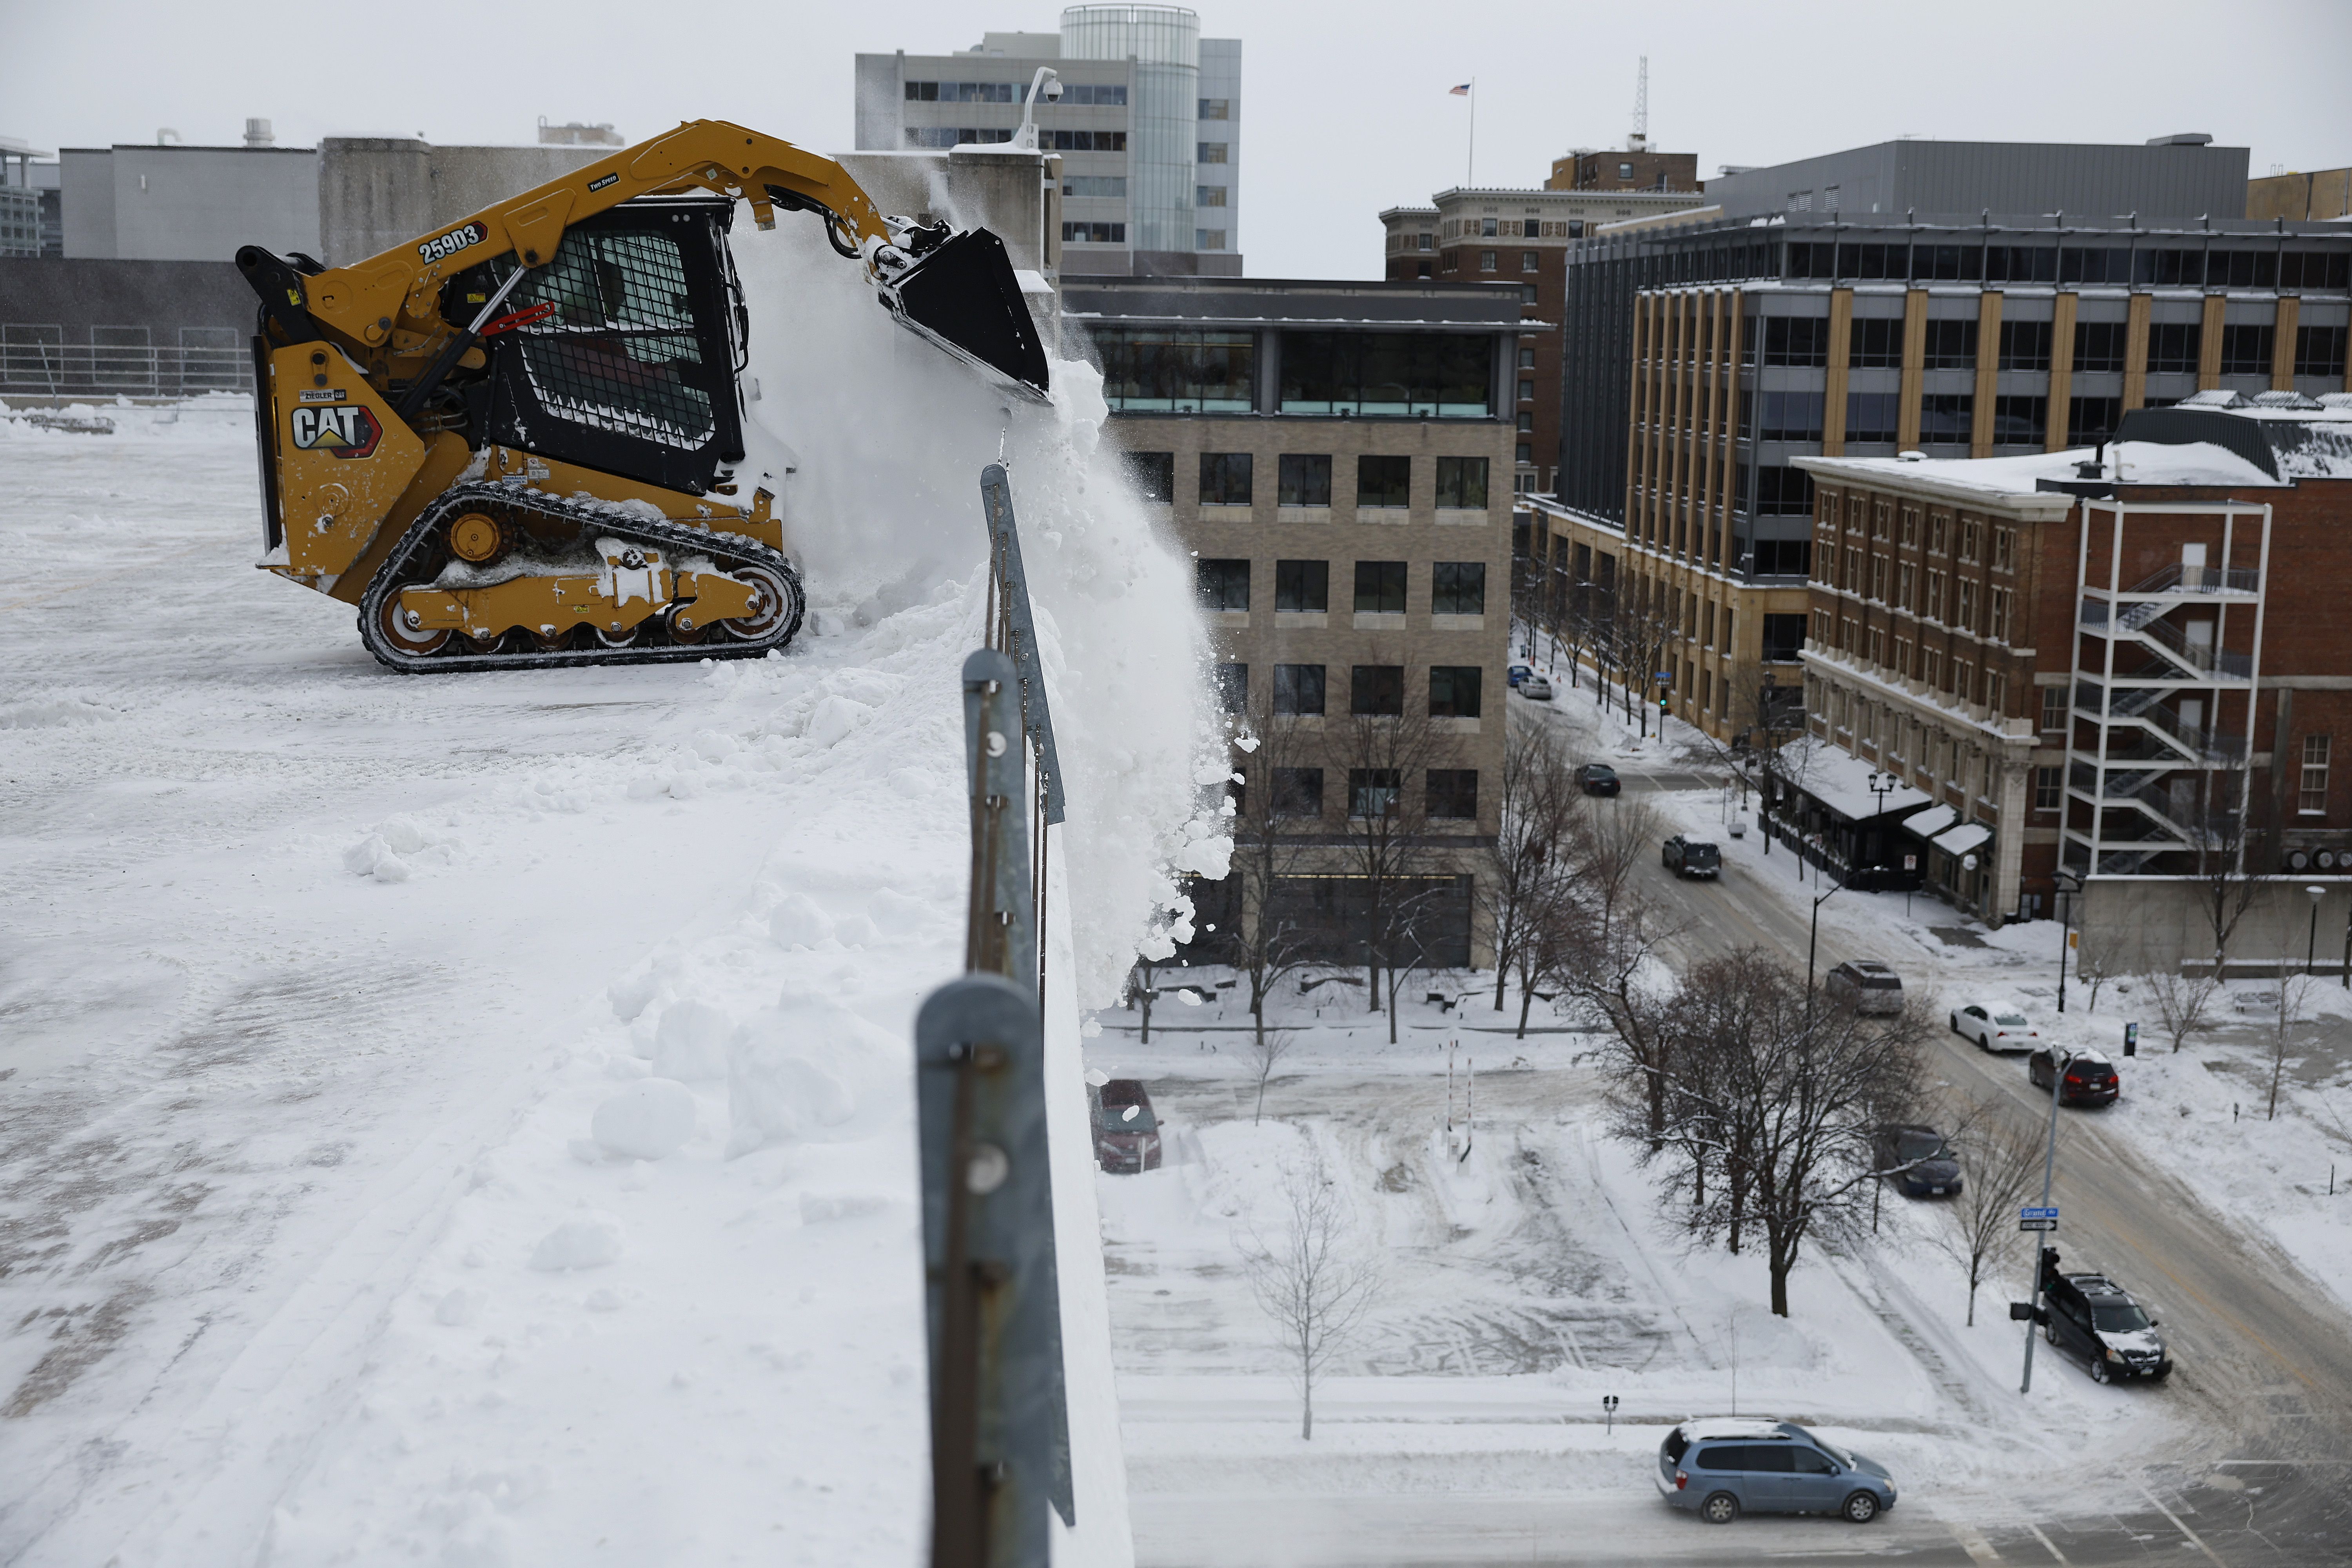 Track loaders are used to shovel and dump snow off of the top of a parking garage as sub-freezing temperatures continue on January 15, 2024 in Des Moines, Iowa. Iowans vote today in the state’s caucuses for the first contest in the 2024 Republican presidential nominating process.